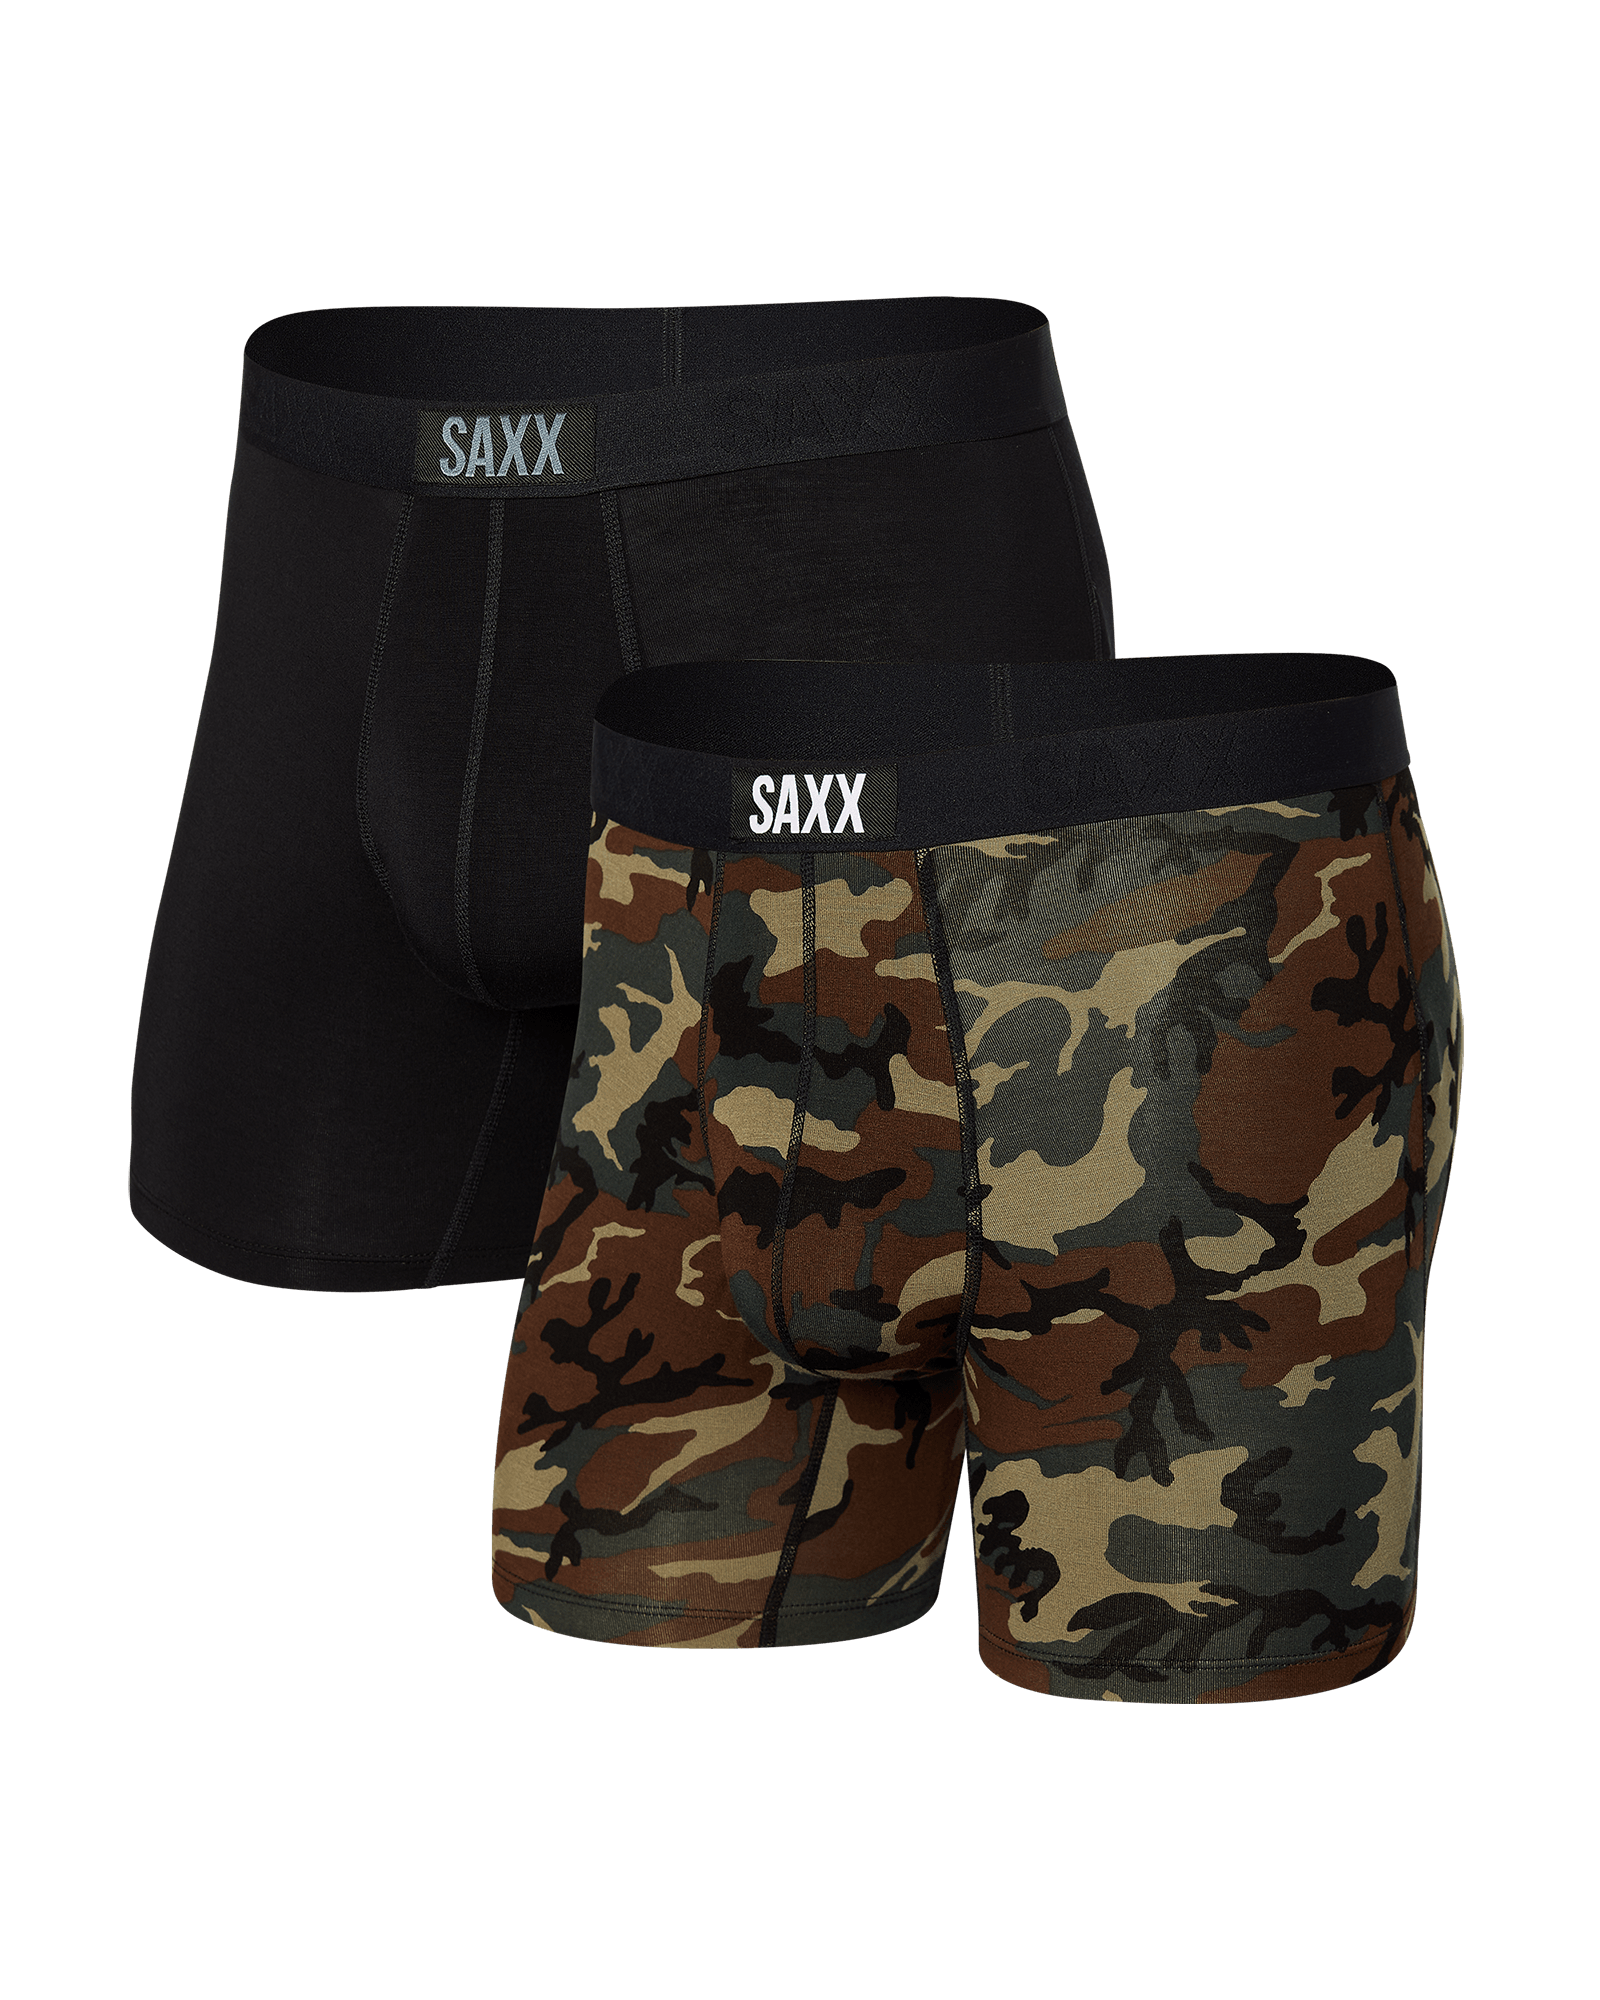 Front of Vibe Boxer Brief 2 Pack in Black/Wood Camo